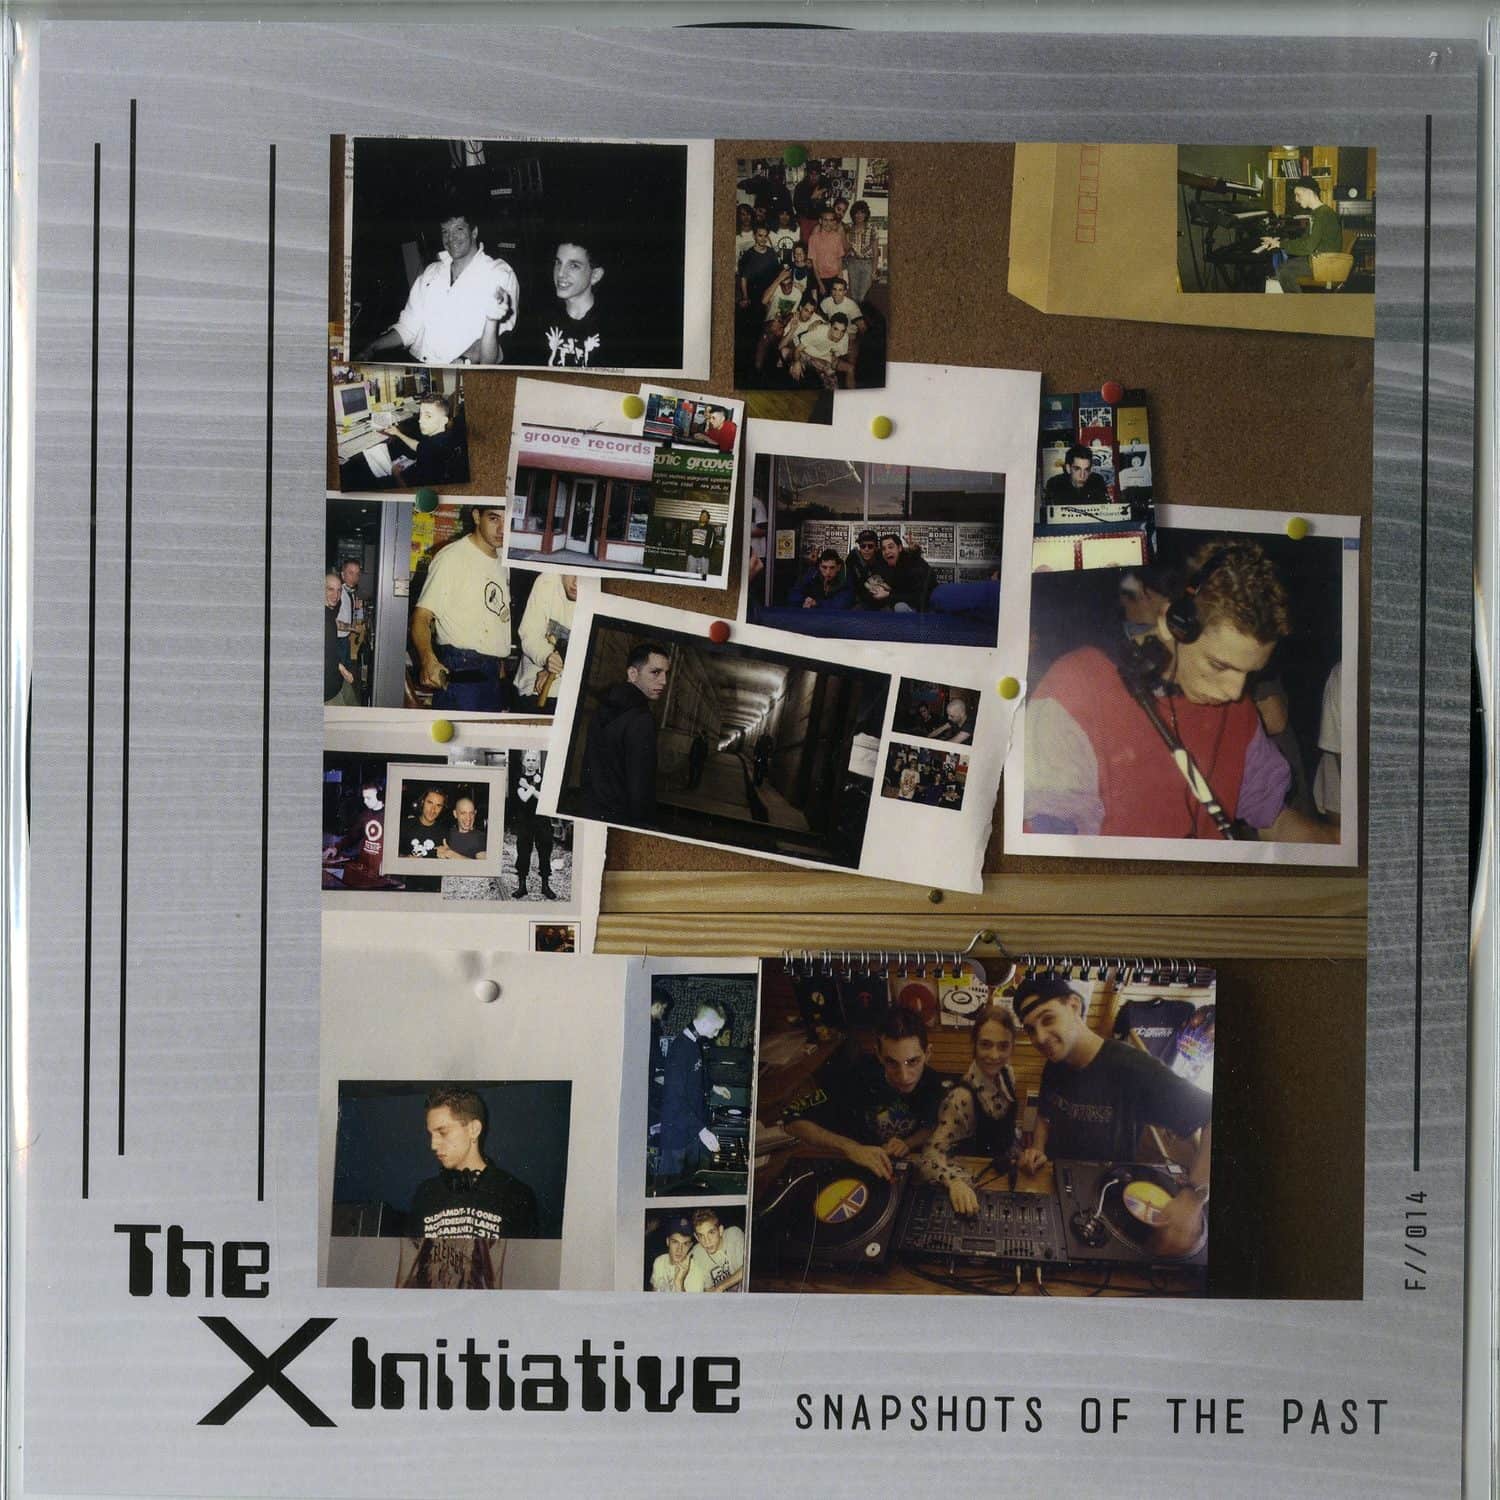 The X Initiative - SNAPSHOTS OF THE PAST